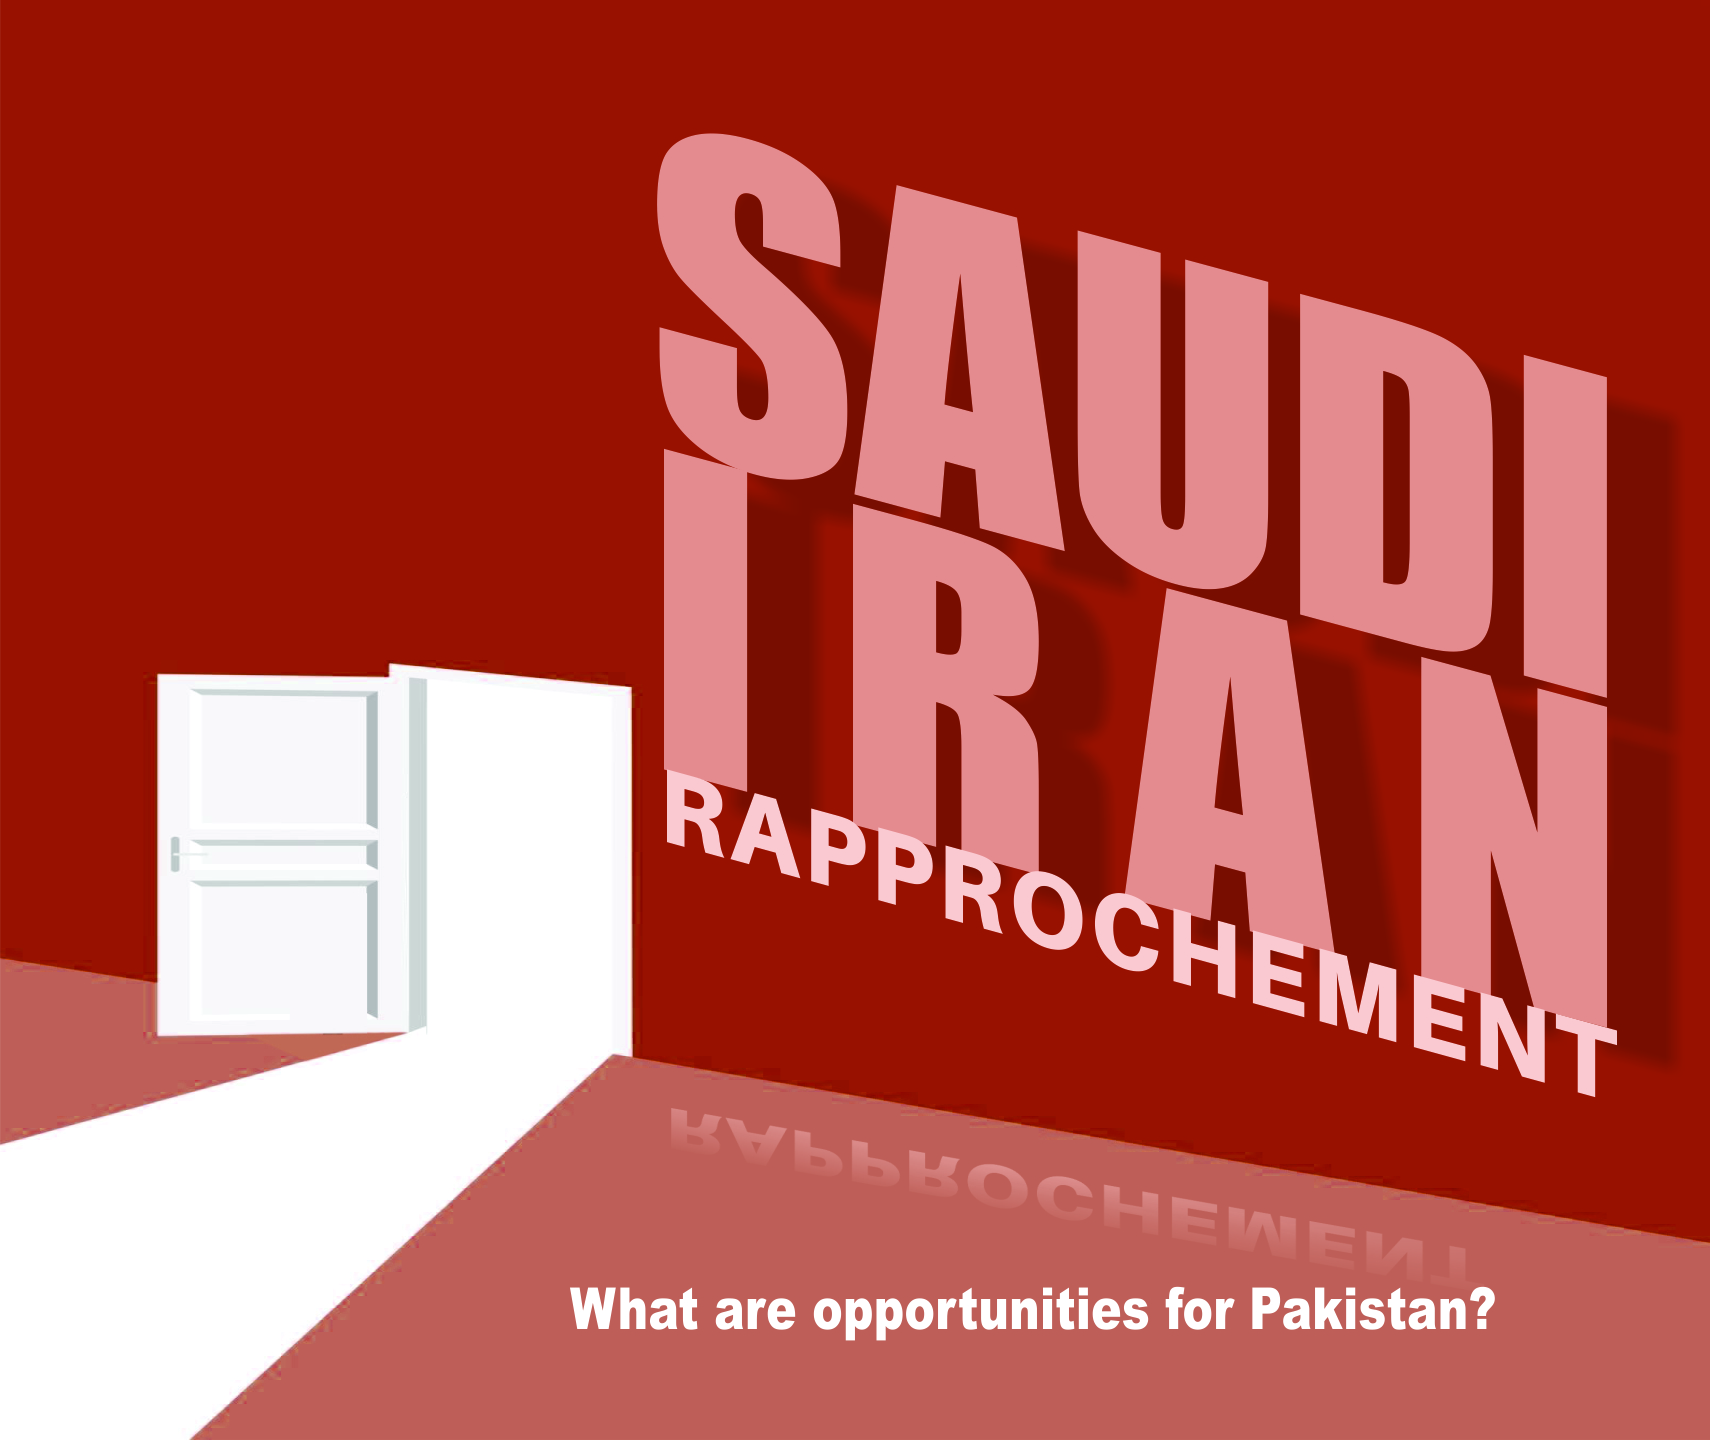 You are currently viewing Saudi-Iran Rapprochement